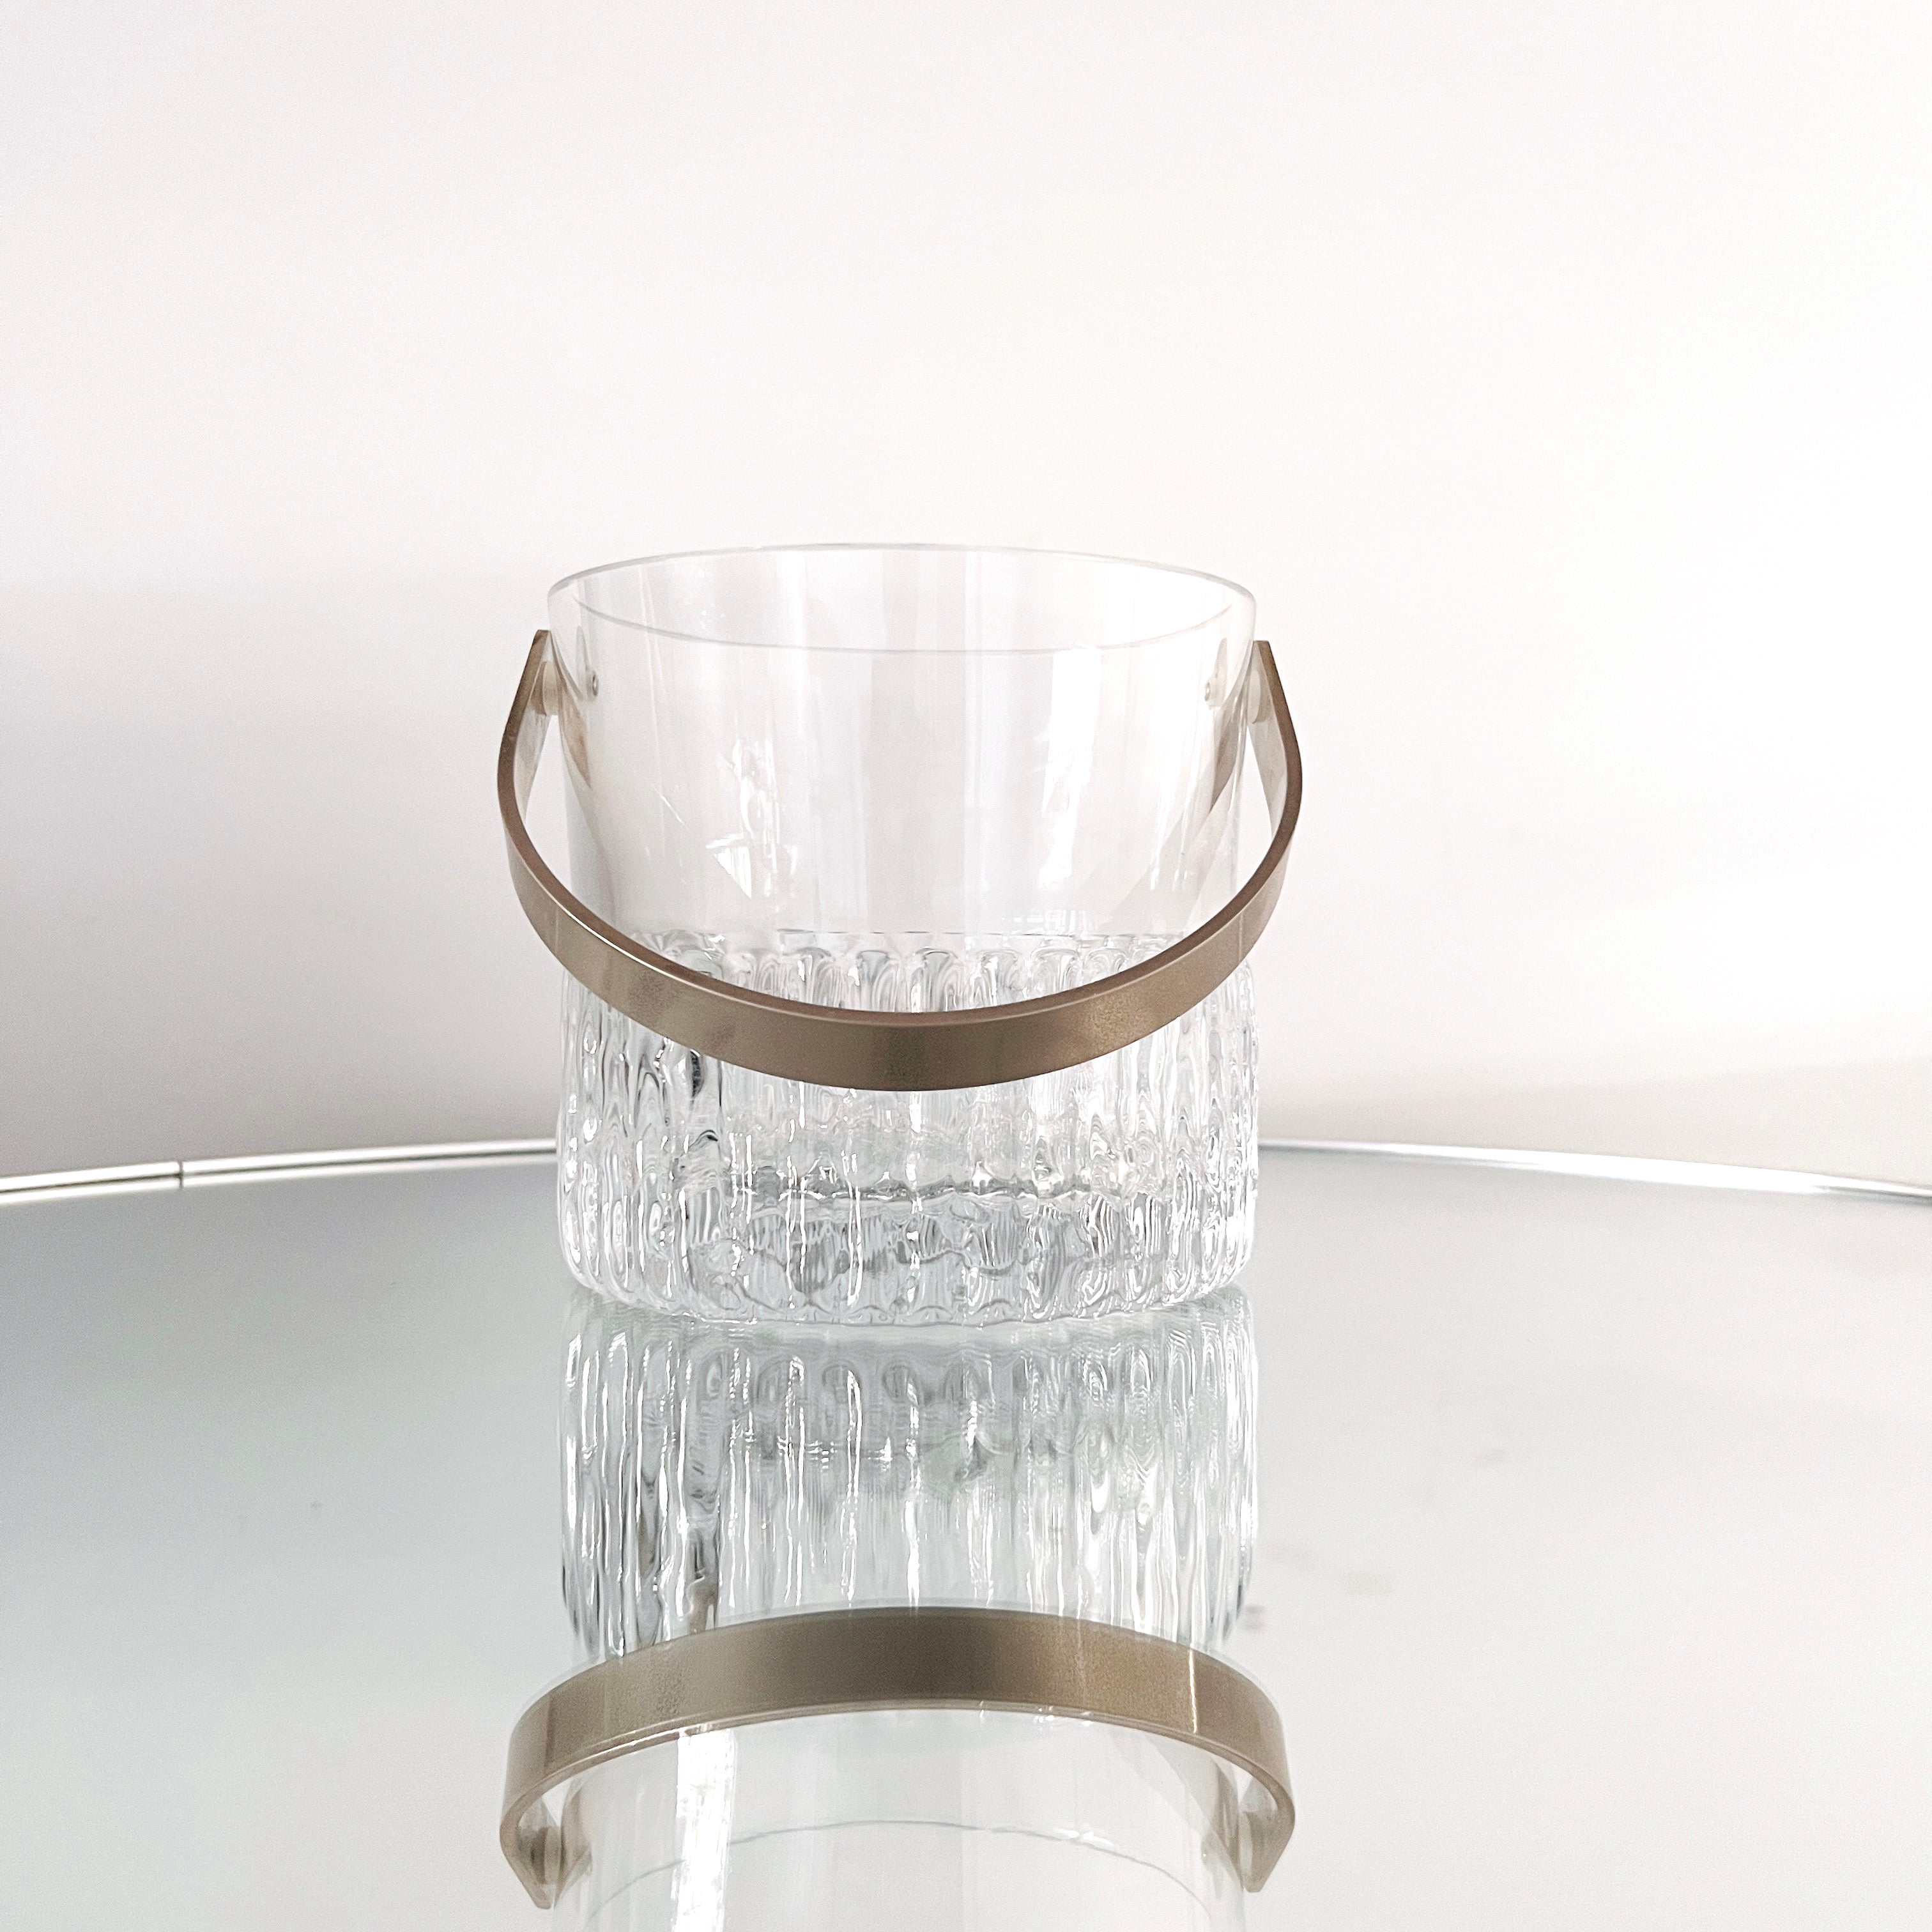 Heavyweight handcrafted crystal ice bucket with fluted and textured design resembling ice glass or icicles. The personal sized ice bucket features polished edges and a stainless steel handle. Makes a chic addition to any barware set and can double